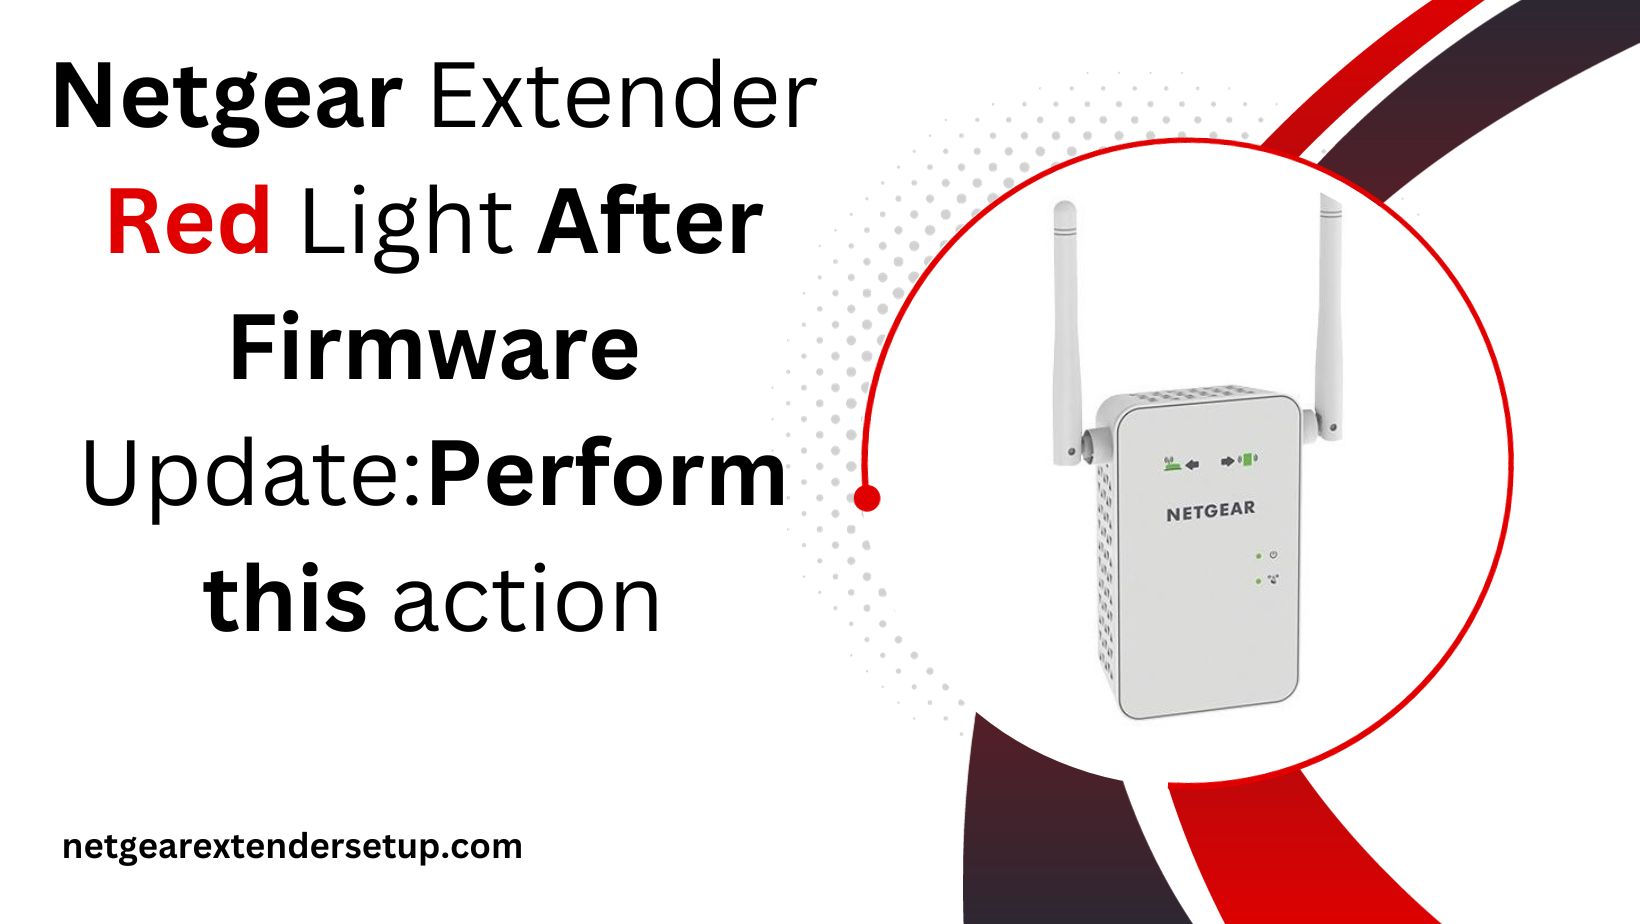 You are currently viewing Netgear Extender Red Light After Firmware Update: Perform this action